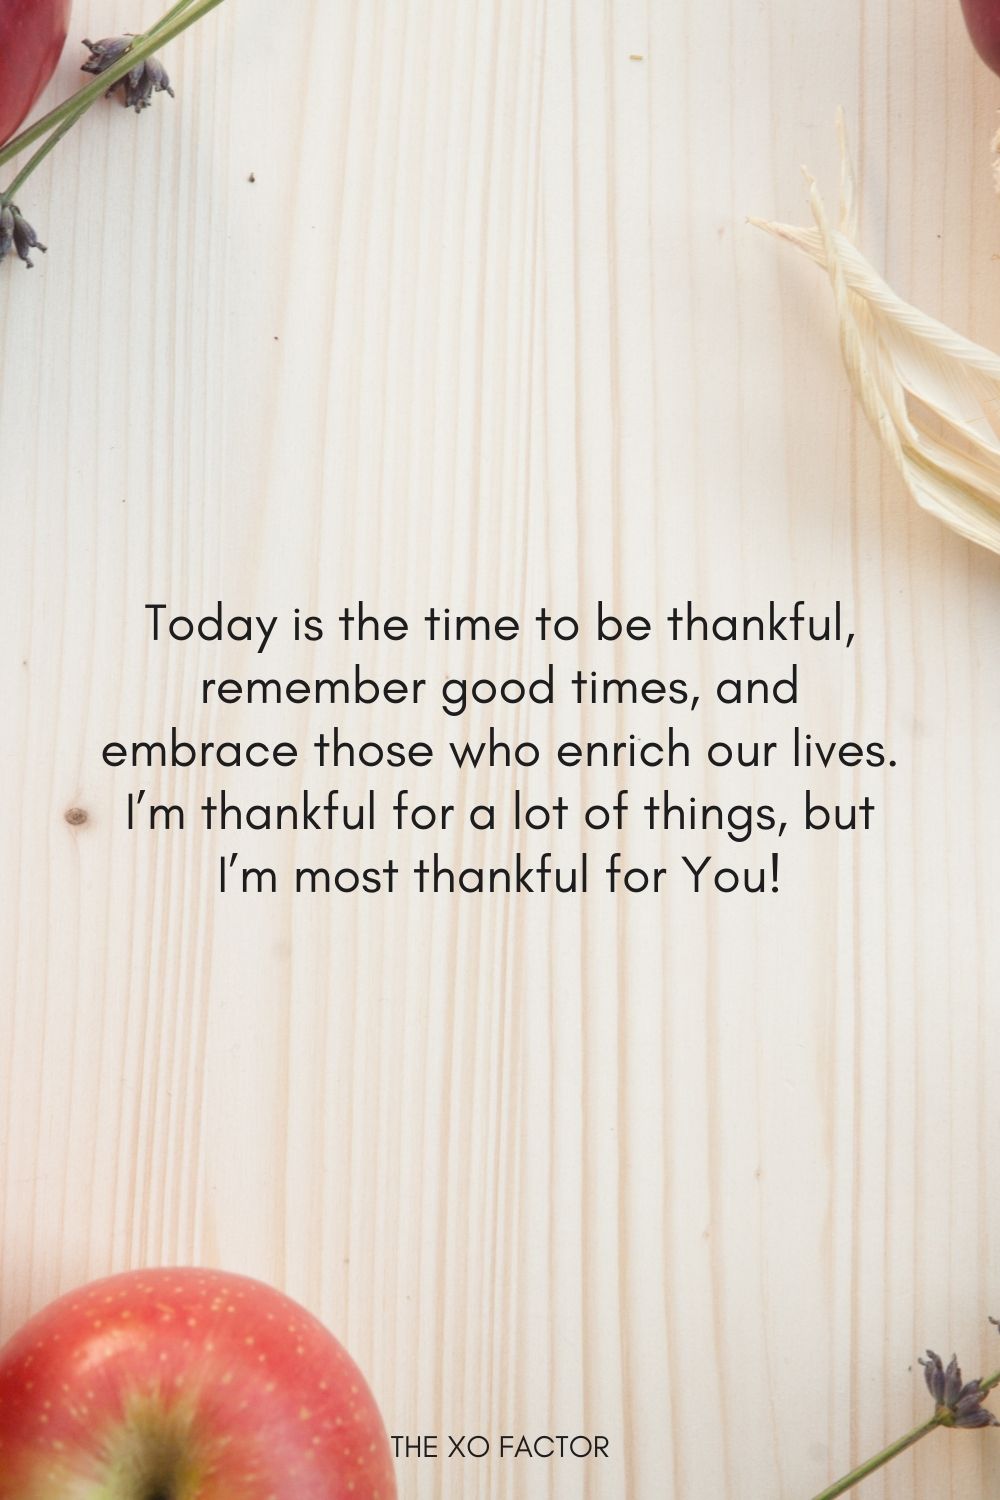 Today is the time to be thankful, remember good times, and embrace those who enrich our lives. I’m thankful for a lot of things, but I’m most thankful for You! Happy Thanksgiving!